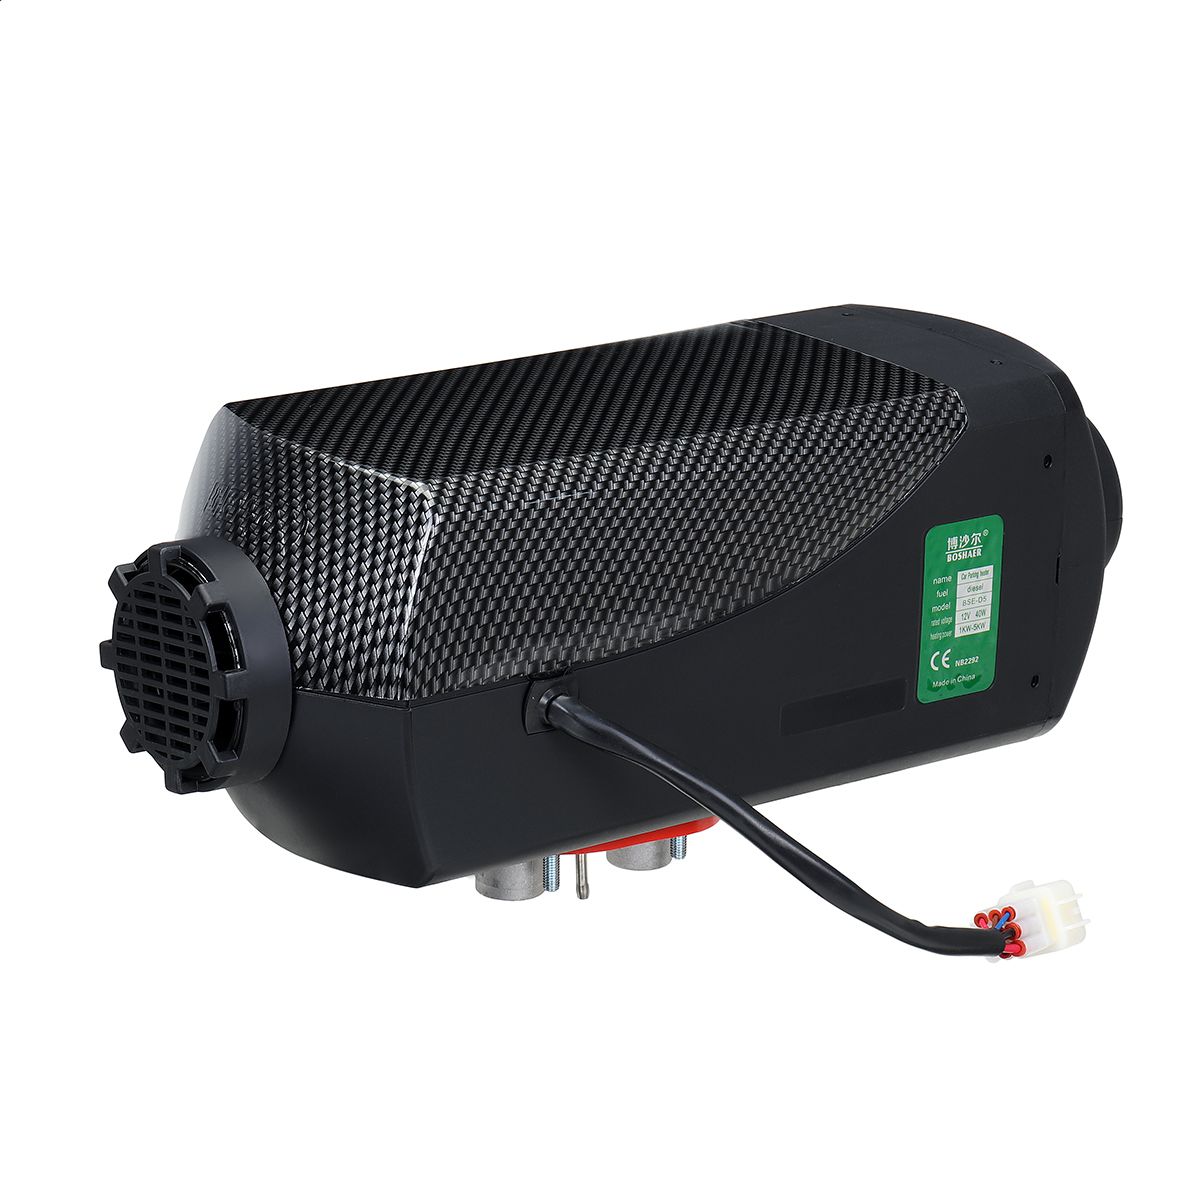 Air-Diesel-Parking-Heater-With-the-Remote-Control-Adjustable-Digital-Display-Constant-Temperature-1580049